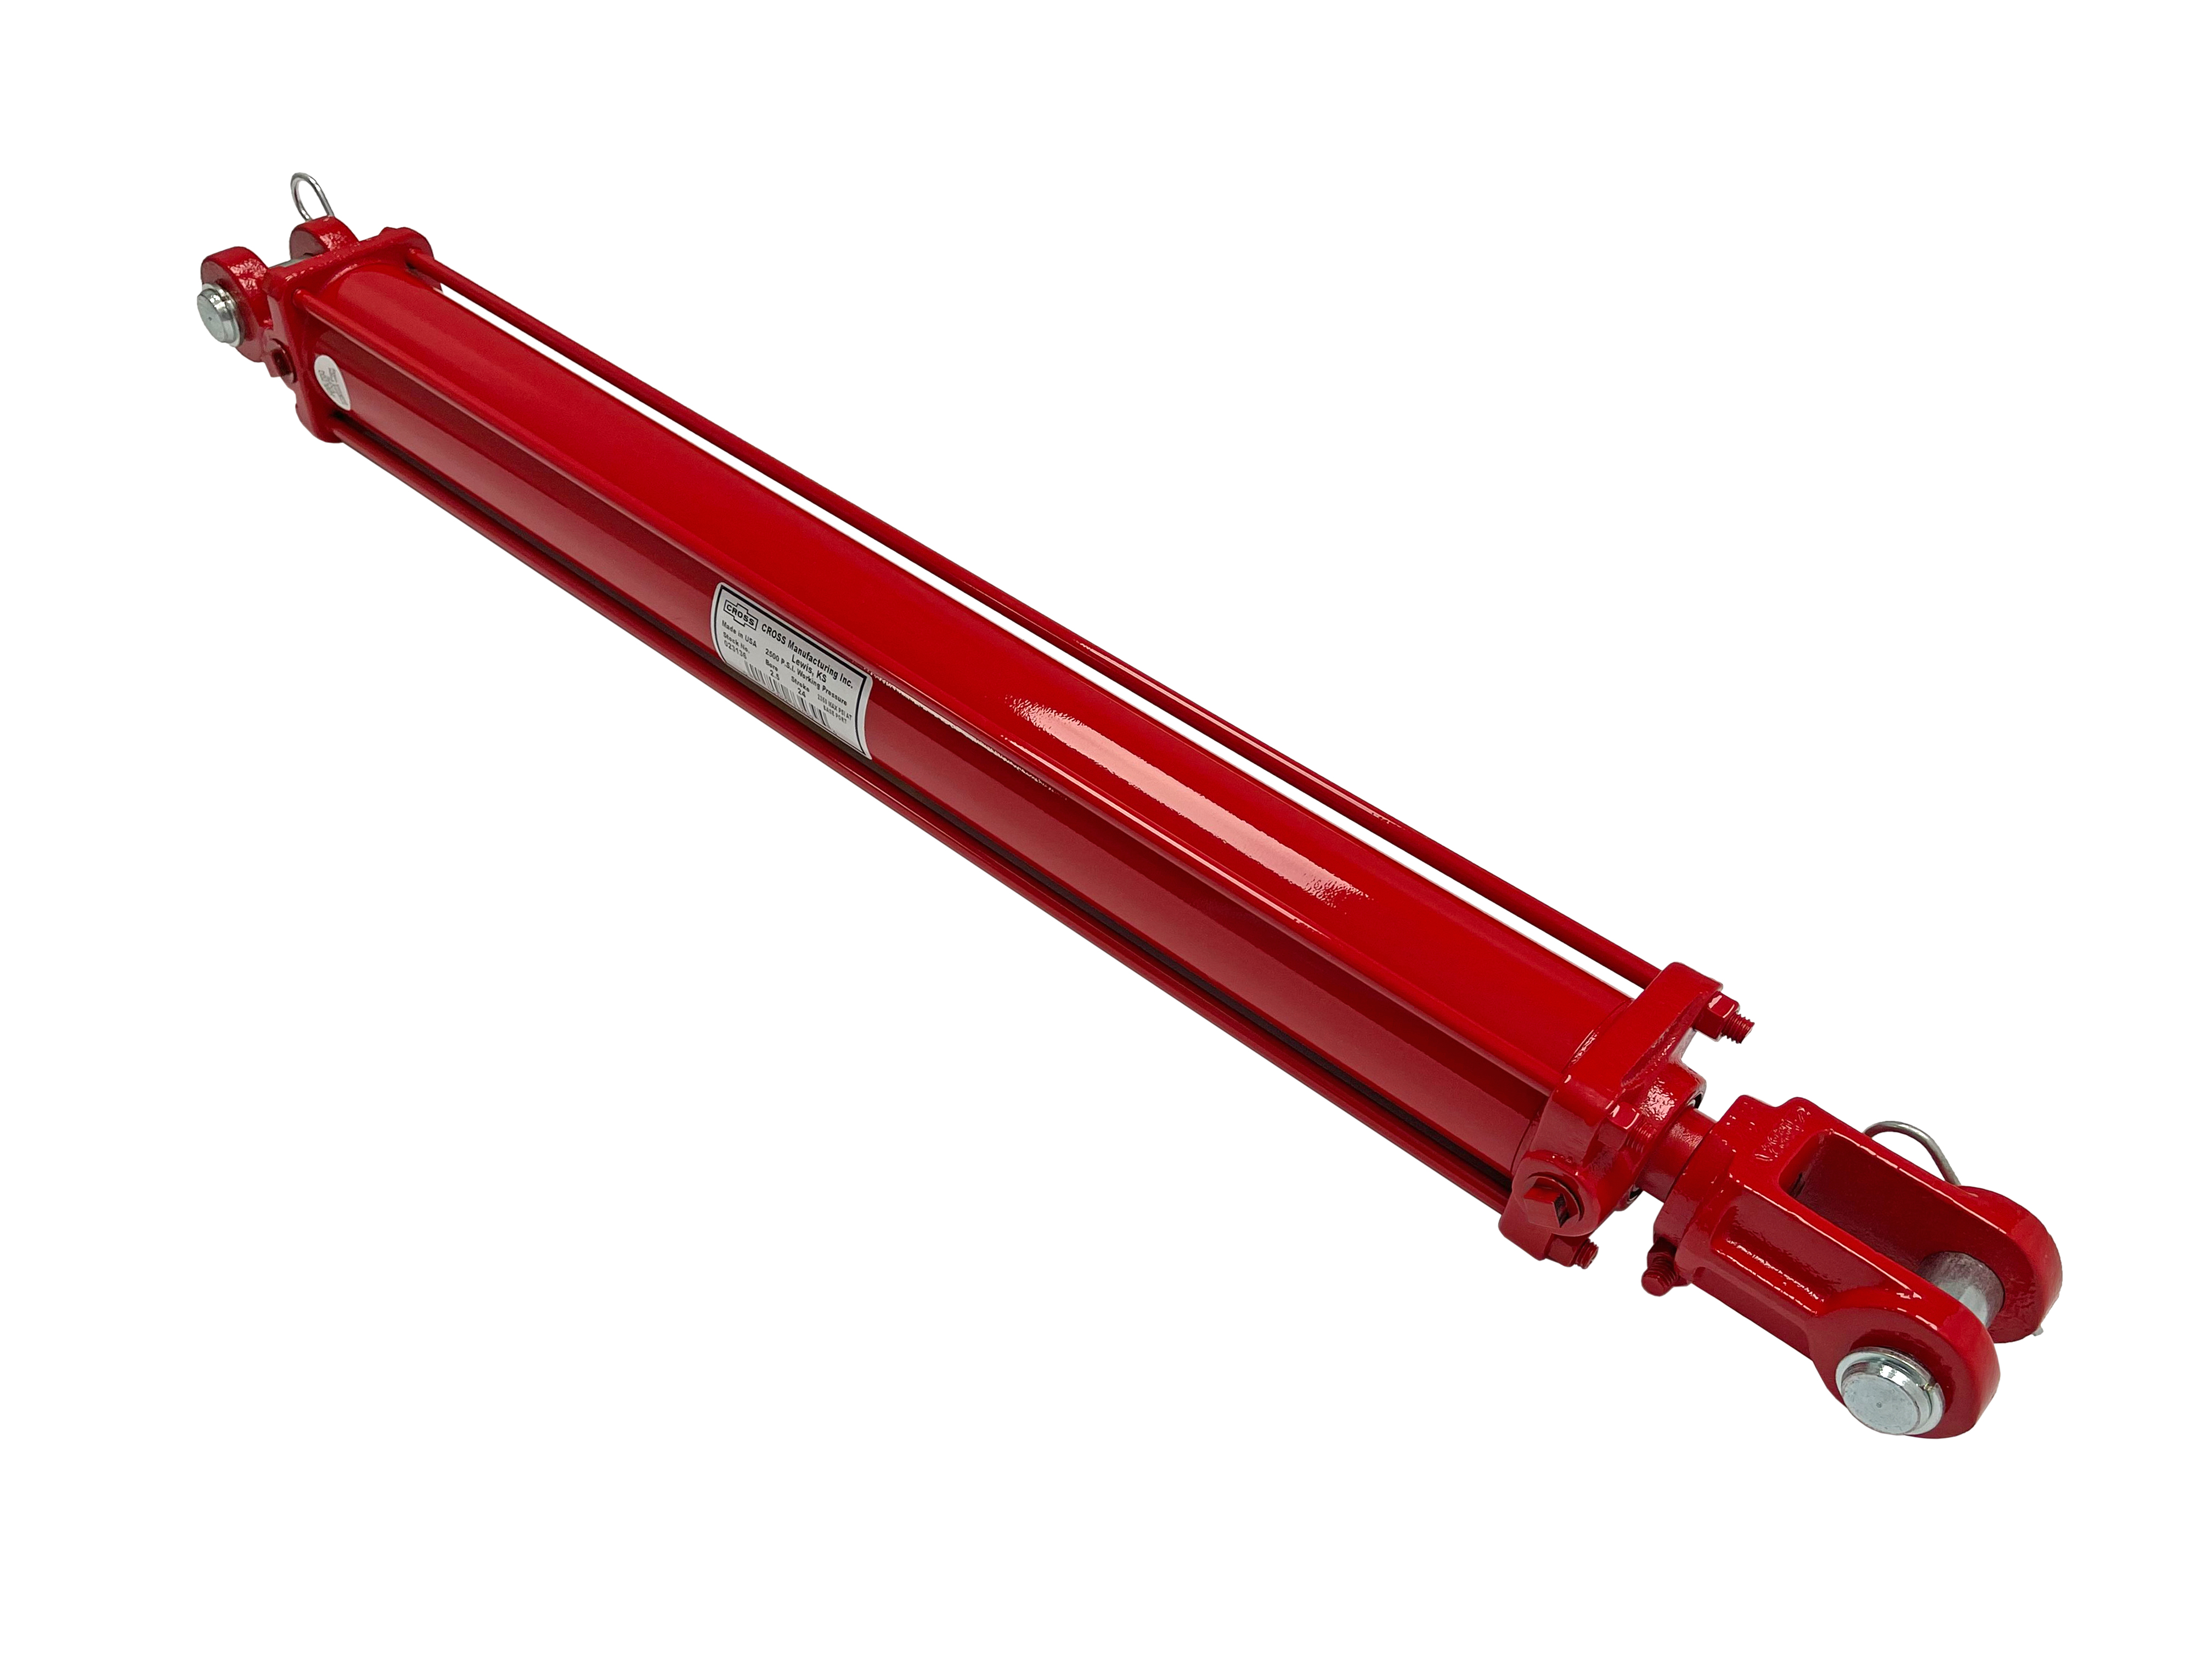 Details about   2.5 Bore Tie Rod Hydraulic Cylinder 13” Stroke 